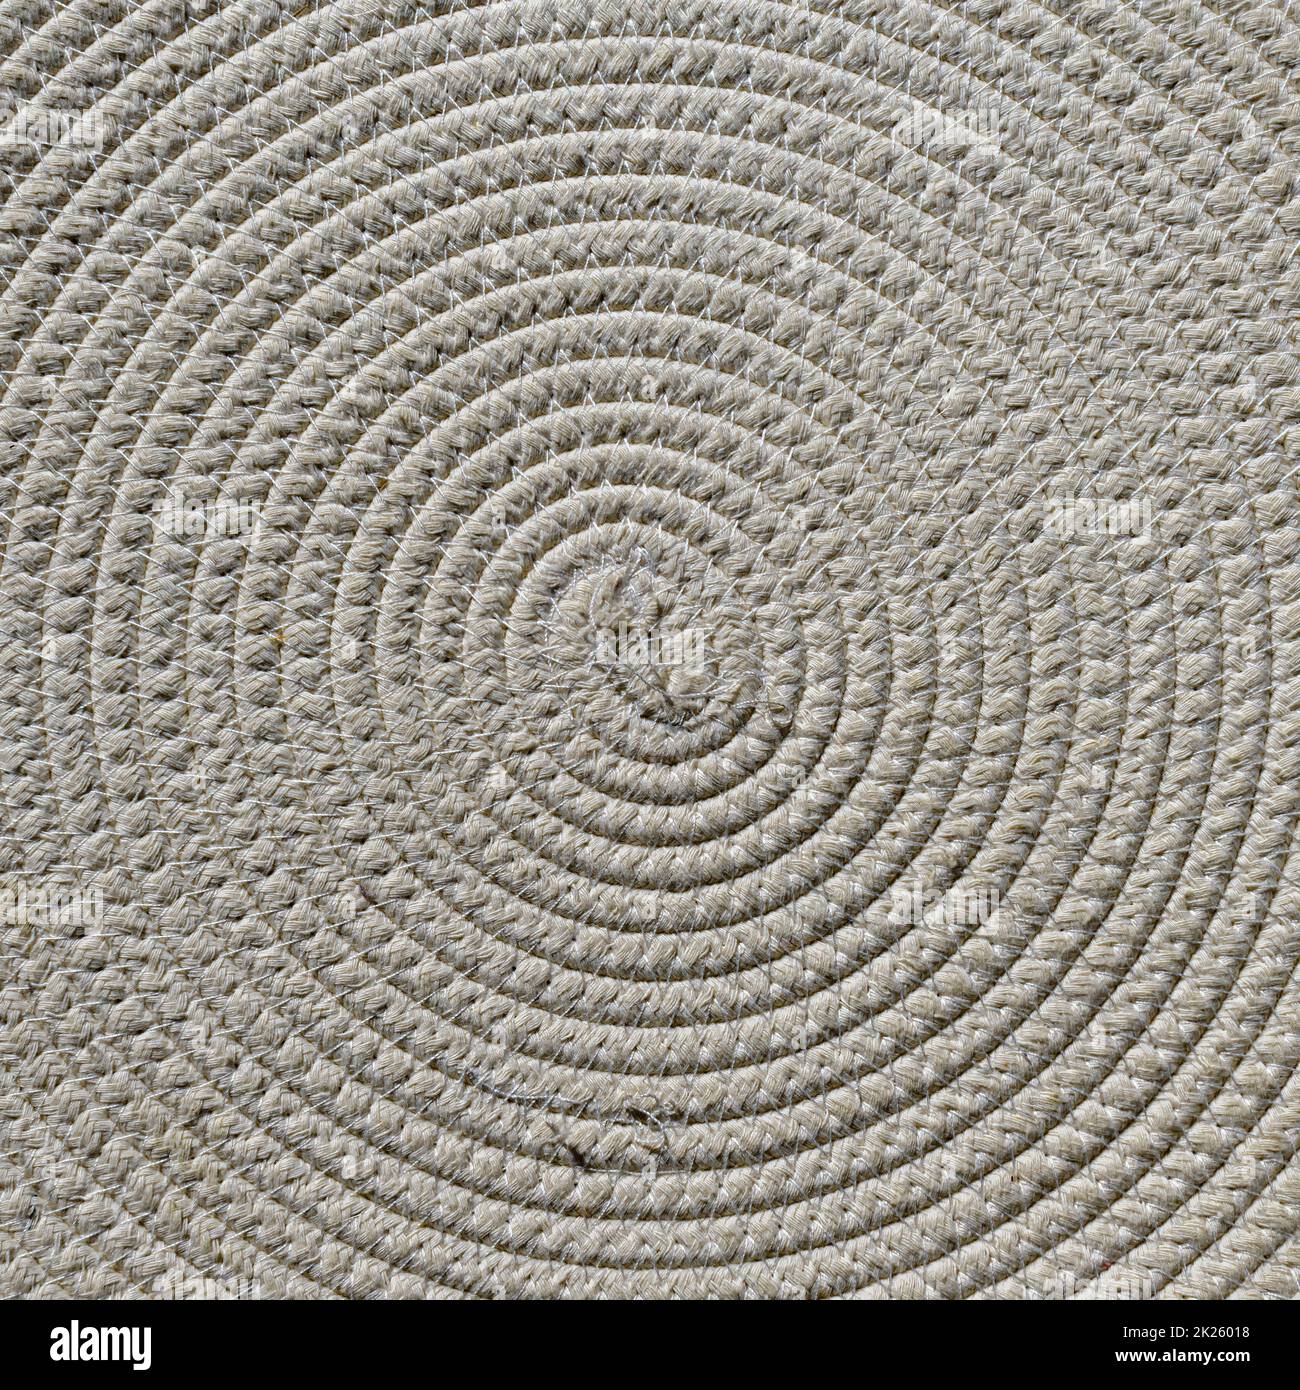 Concentric geometric pattern formed by woven natural fibers Stock Photo